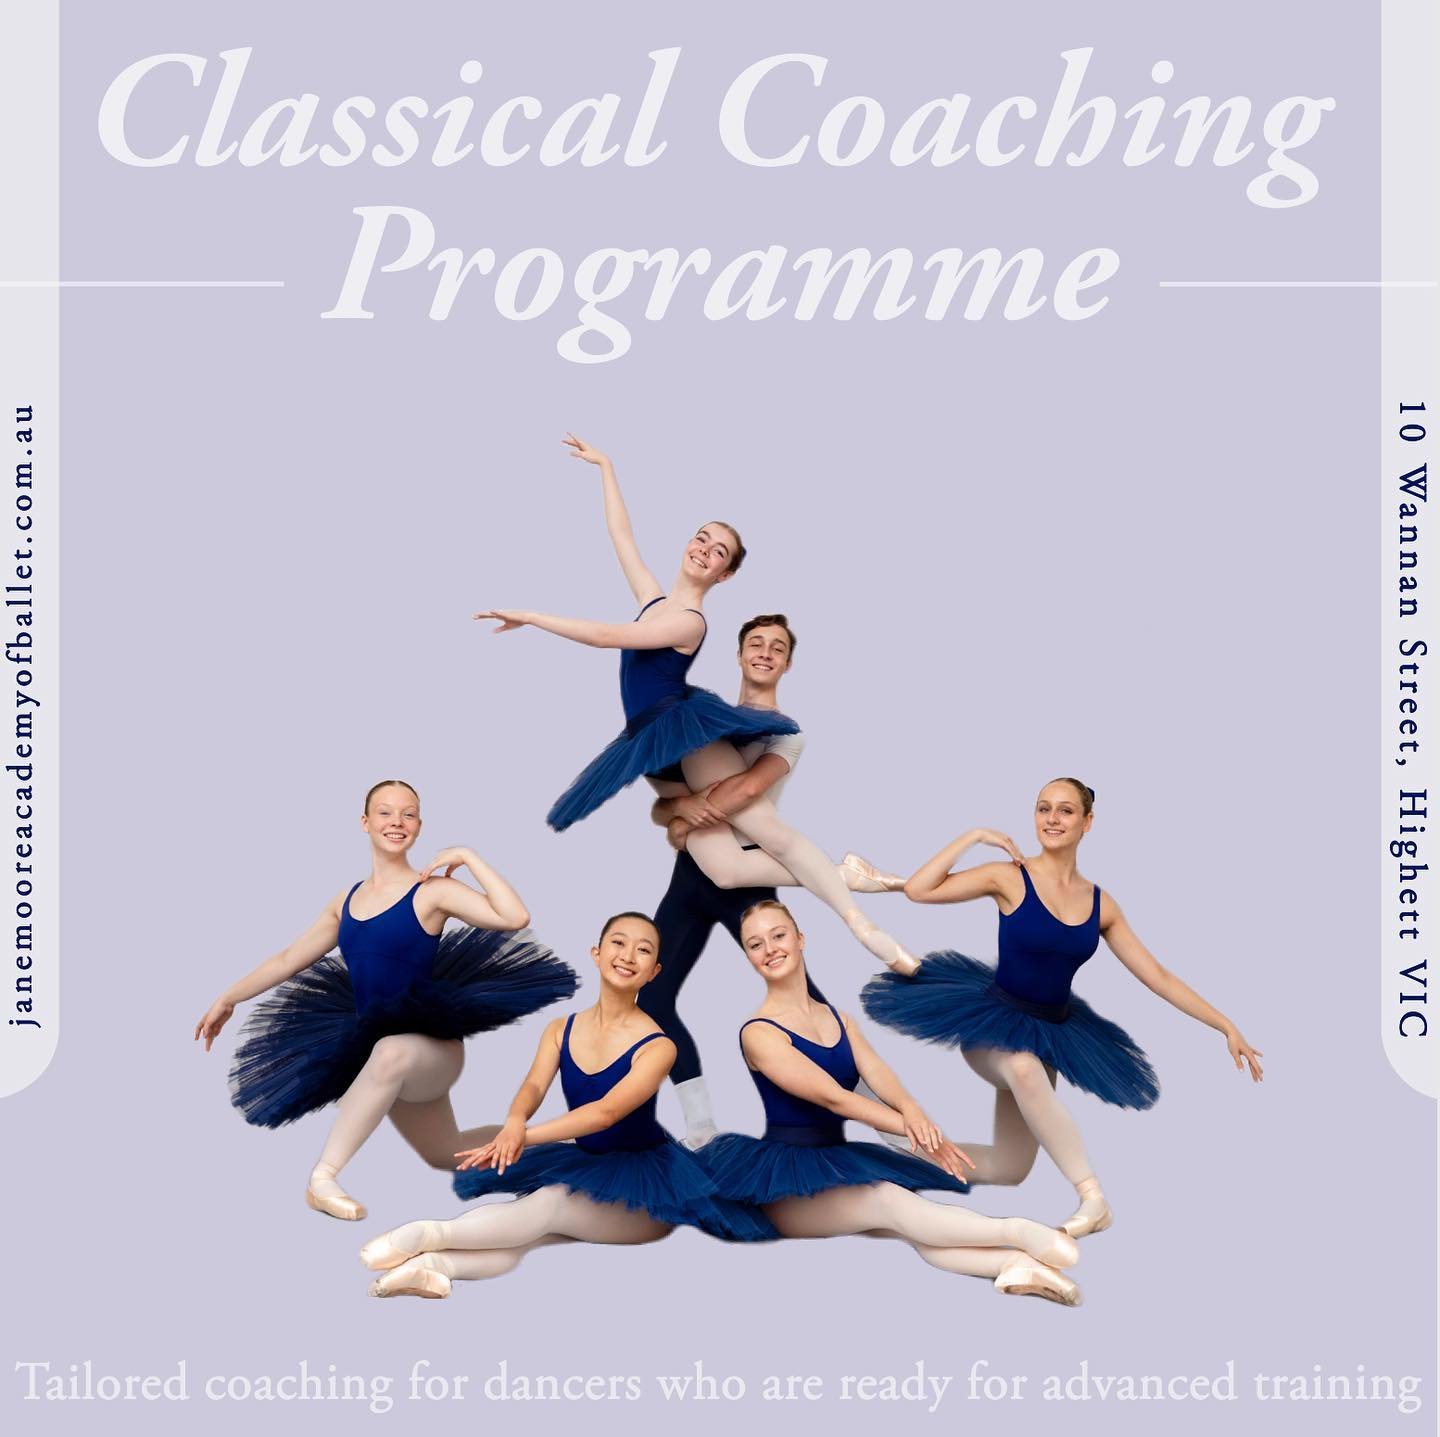 External Students Welcome!

Our Classical Coaching Programme Students have been accepted into the following schools directly from their training at Jane Moore:
&bull; The Royal Ballet School, London
&bull; Paris Opera Ballet School
&bull; John Cranko